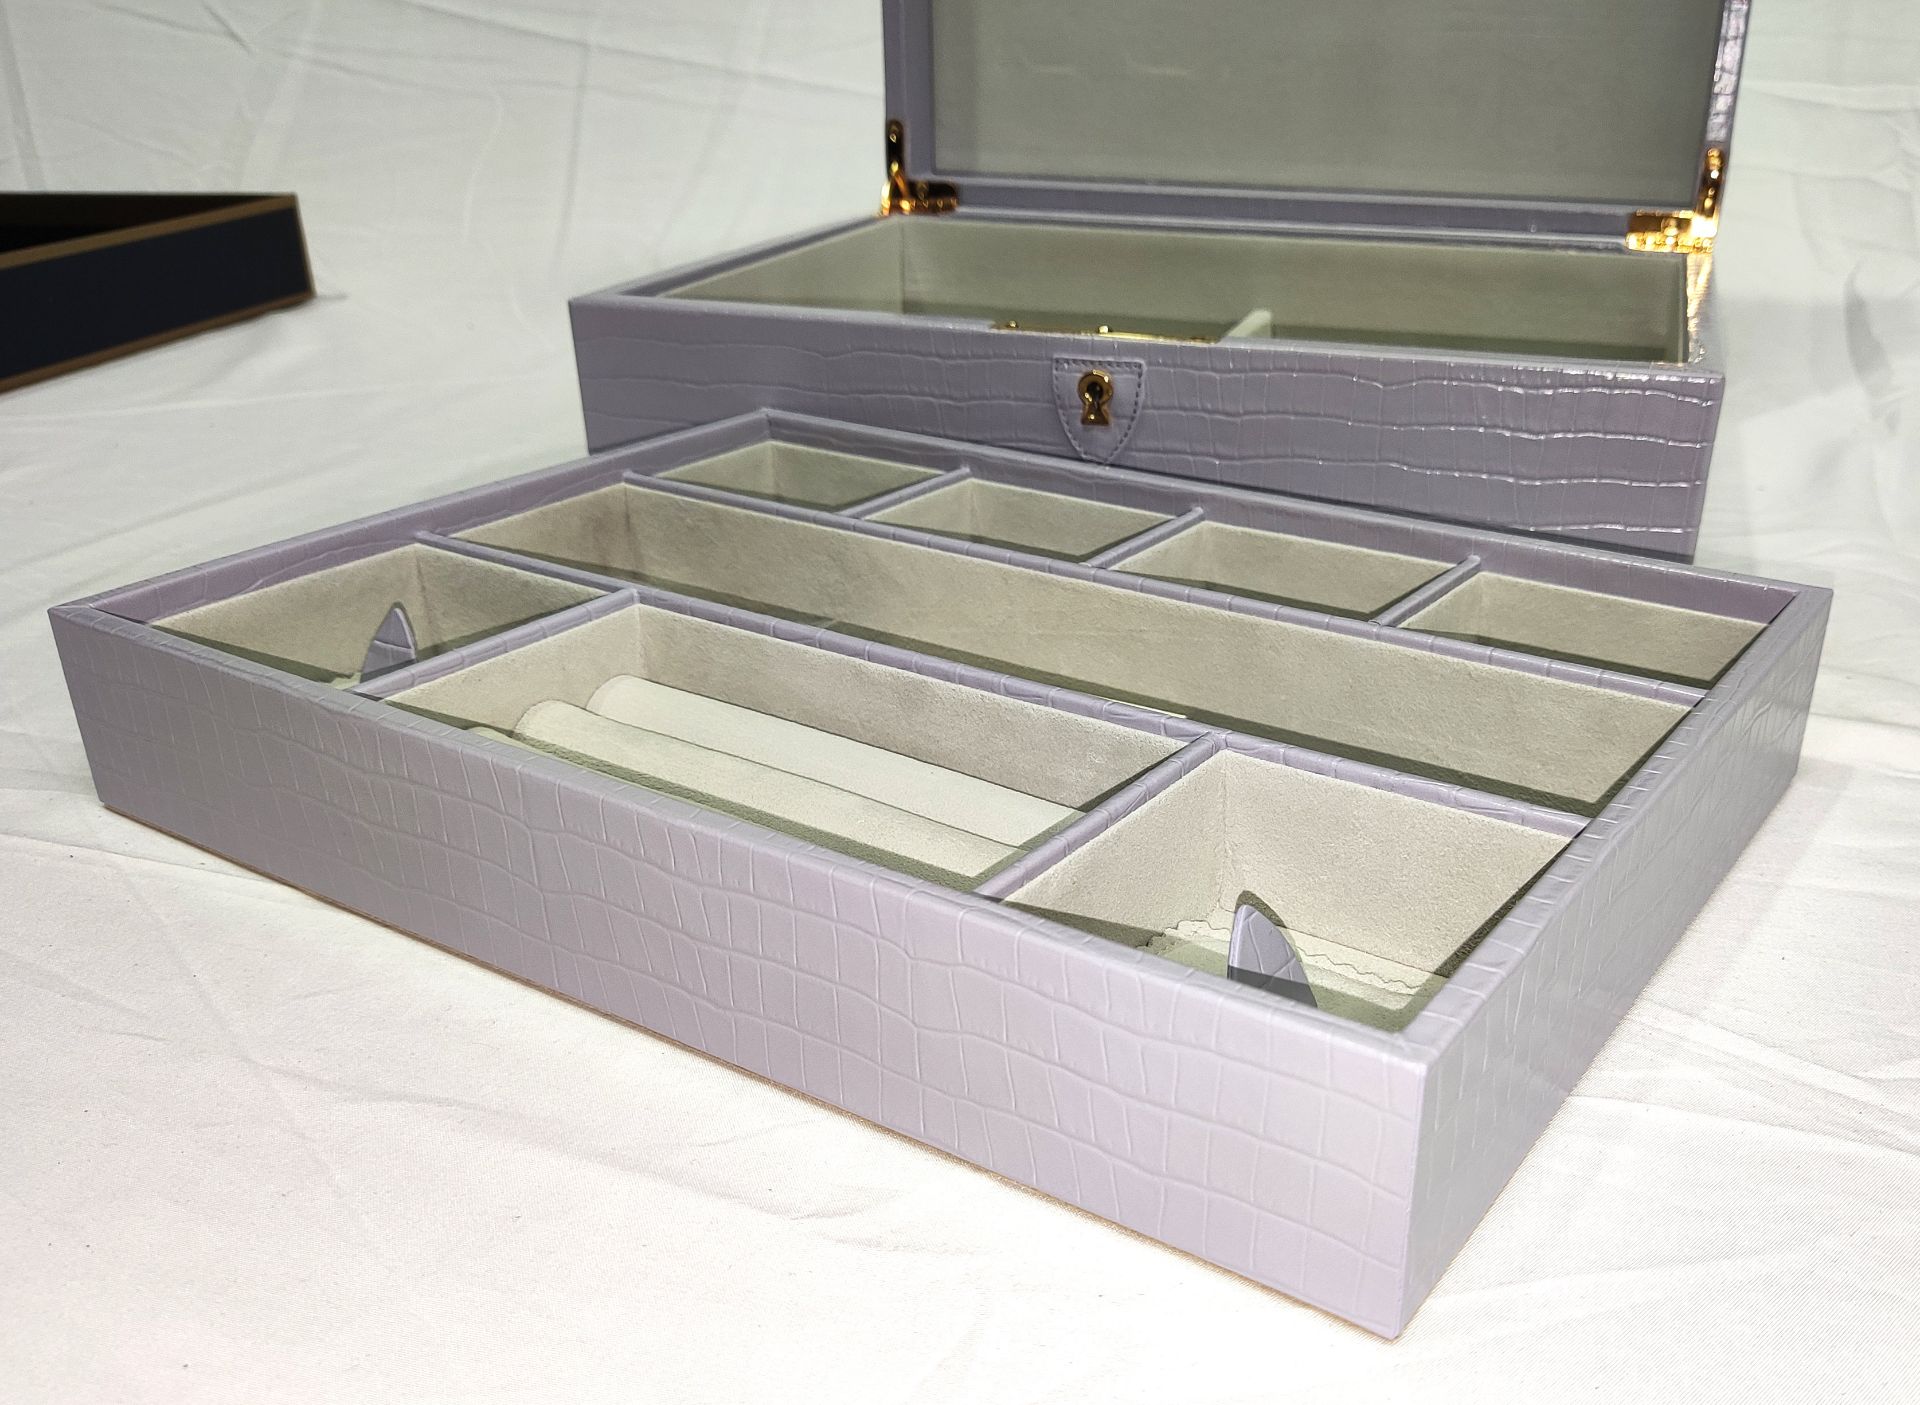 1 x ASPINAL OF LONDON Grand Luxe Jewellery Case In Deep Shine English Lavender Croc - Original - Image 19 of 34